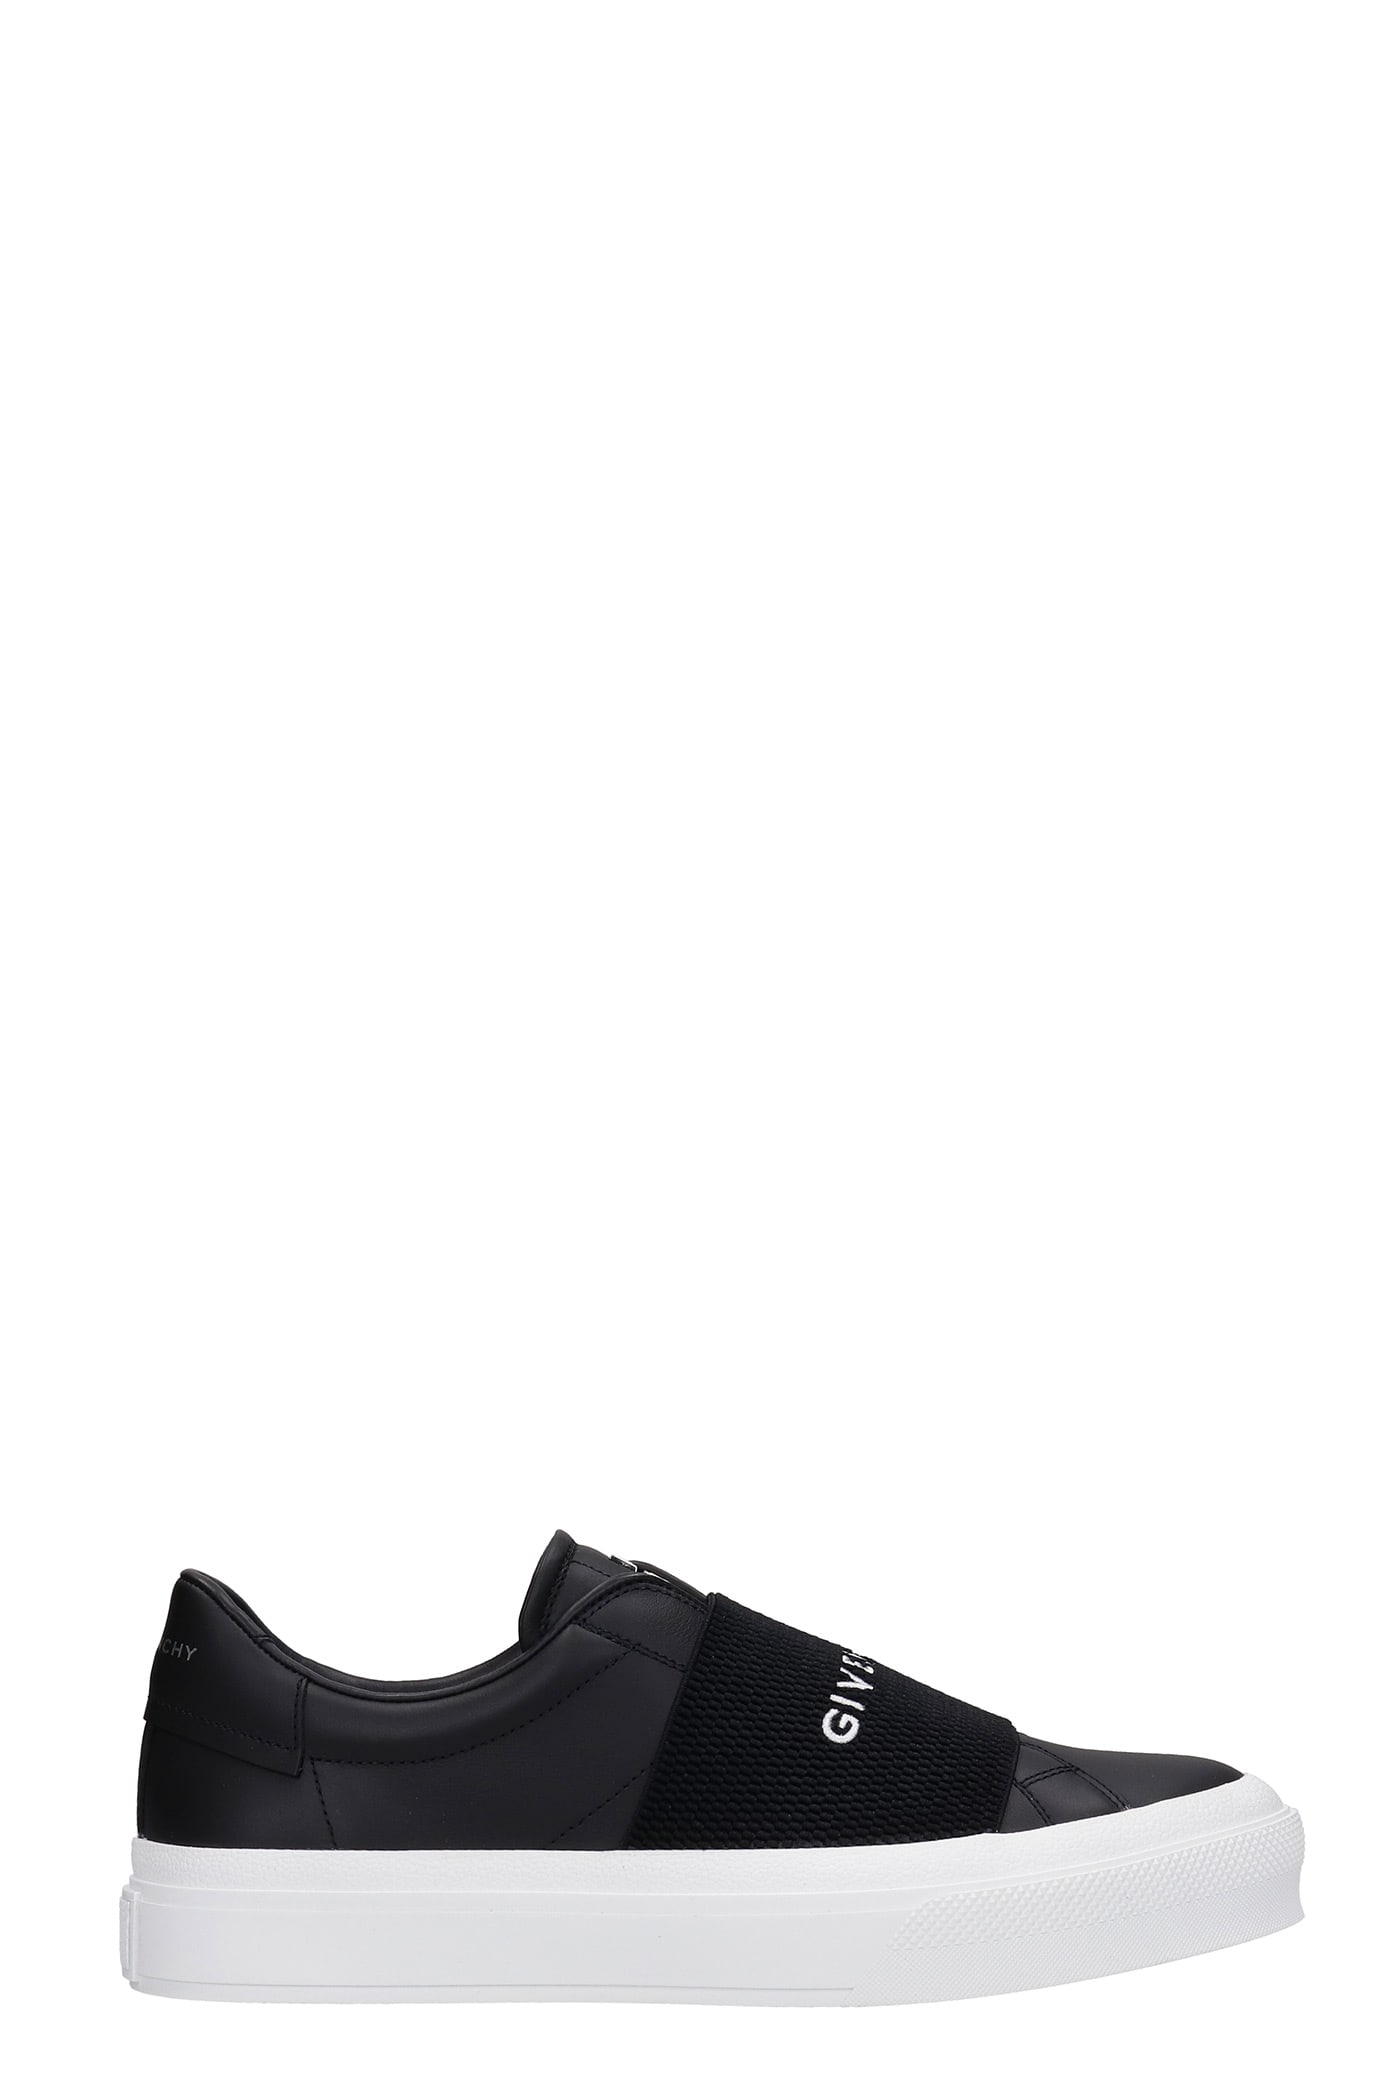 Givenchy City Court Sneakers In Black Leather